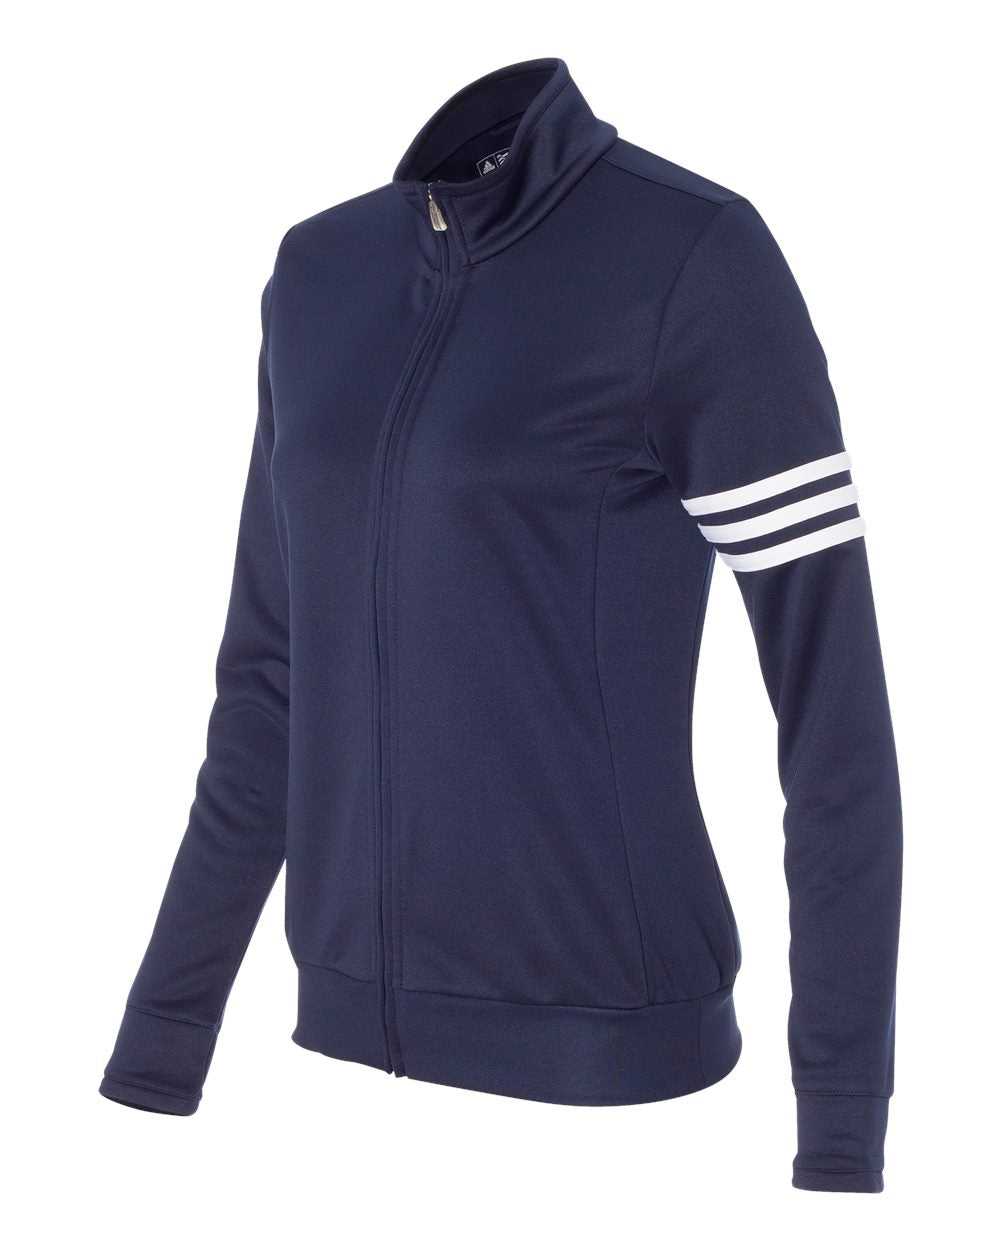 Adidas A191 Women's 3-Stripes French Terry Full-Zip Jacket - Navy Whit